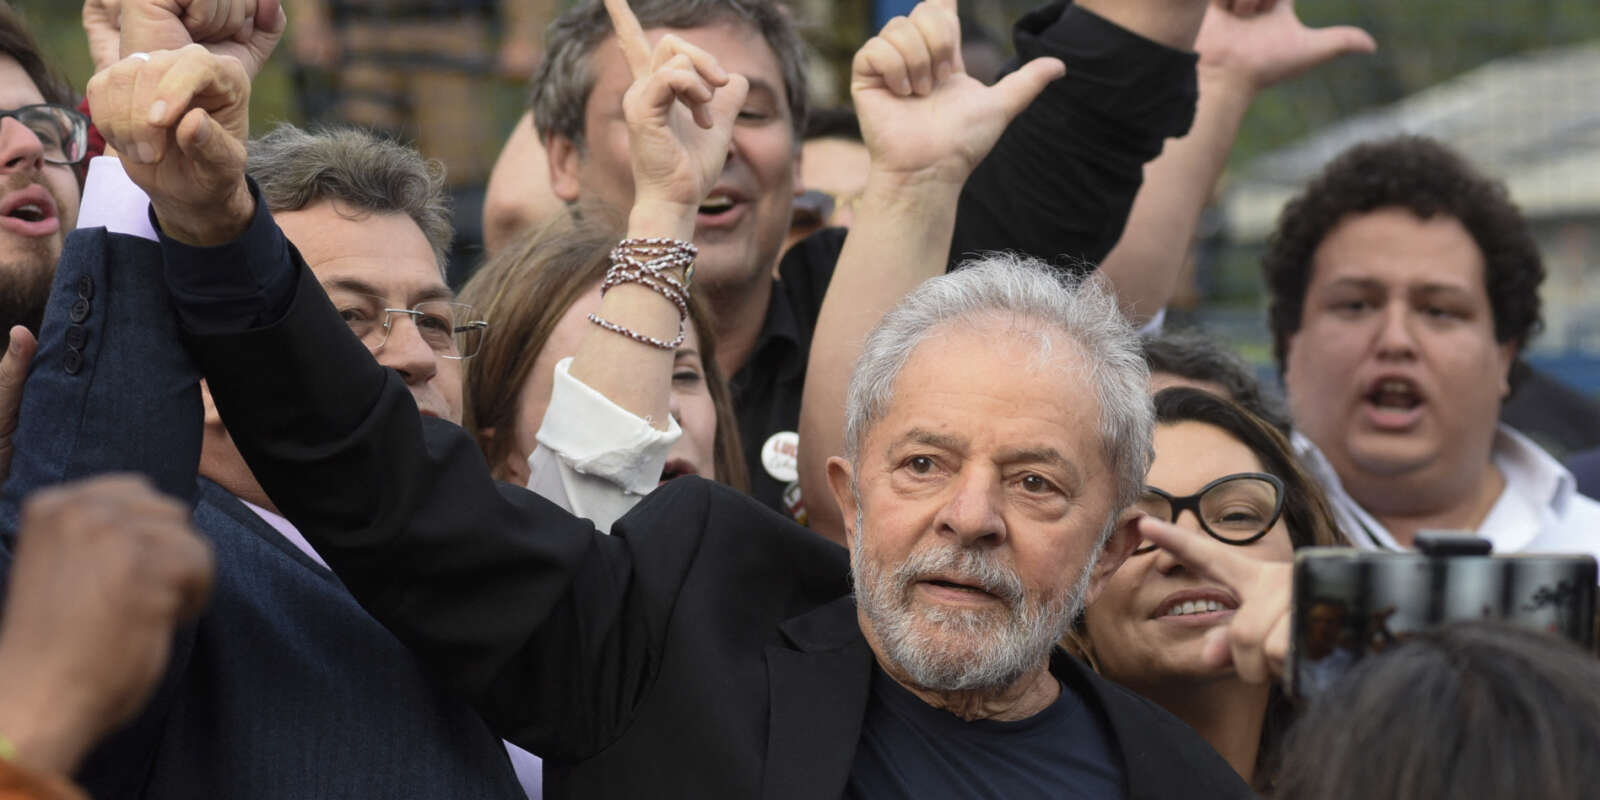 (FILES) In this file photo taken on November 08, 2019 Former Brazilian President Luiz Inacio Lula da Silva gestures as he leaves the Federal Police Headquarters, where he was serving a sentence for corruption and money laundering, in Curitiba, Parana State, Brazil. A Brazilian Supreme Court judge overturned the graft convictions against former president Luiz Inacio Lula da Silva on March 8, 2021, clearing the way for the left-wing leader to run in the 2022 presidential election. / AFP / HENRY MILLEO